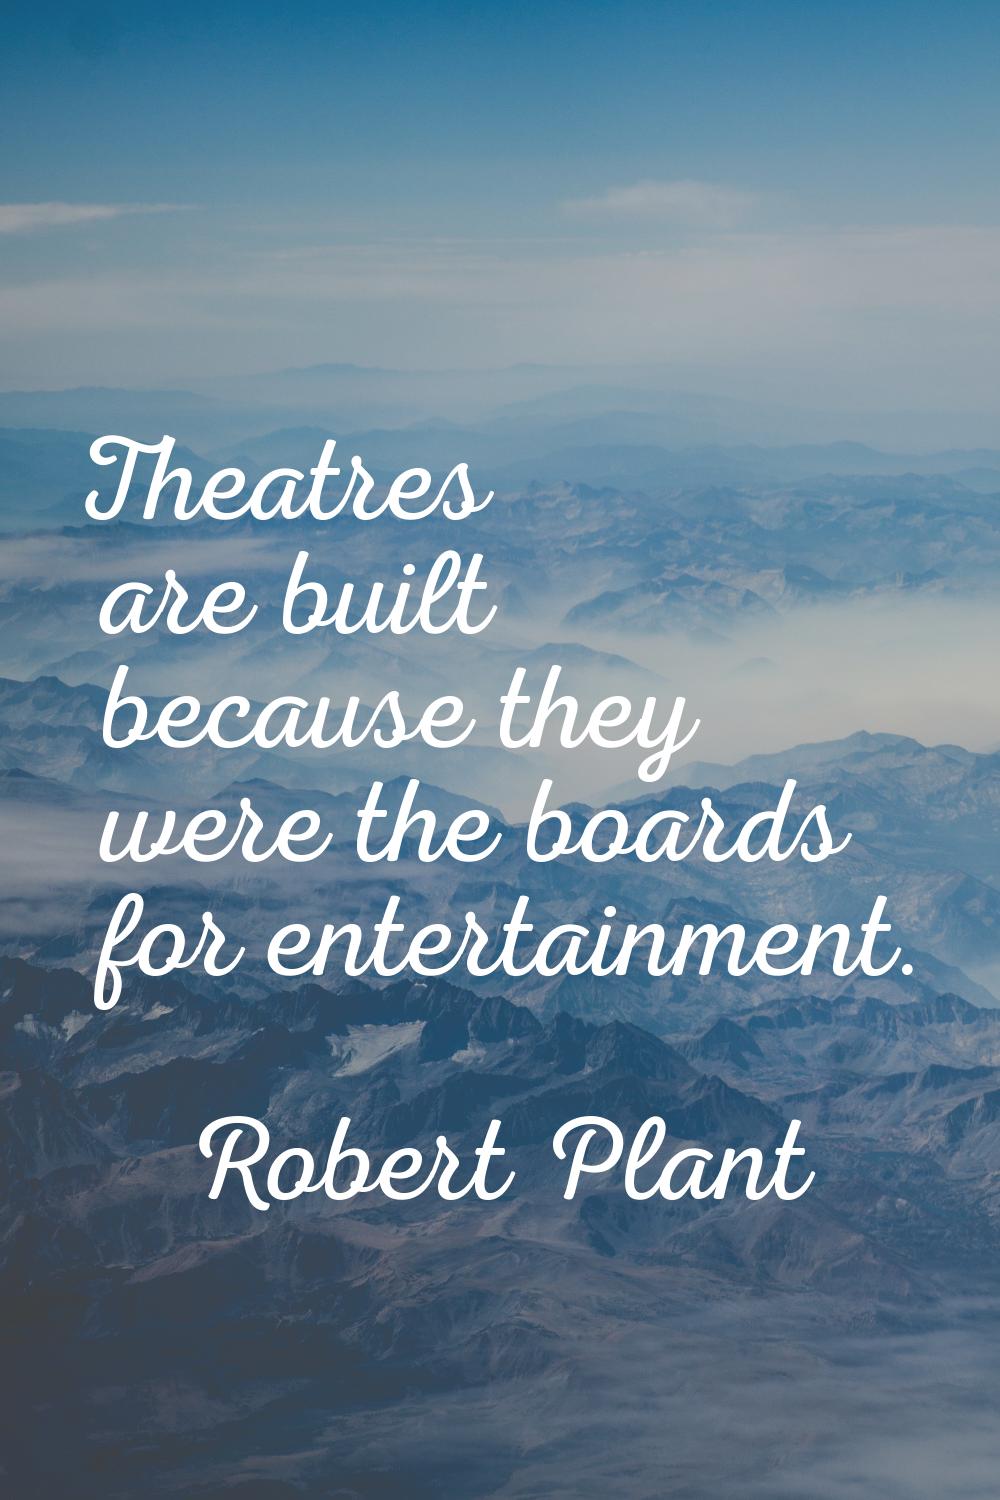 Theatres are built because they were the boards for entertainment.